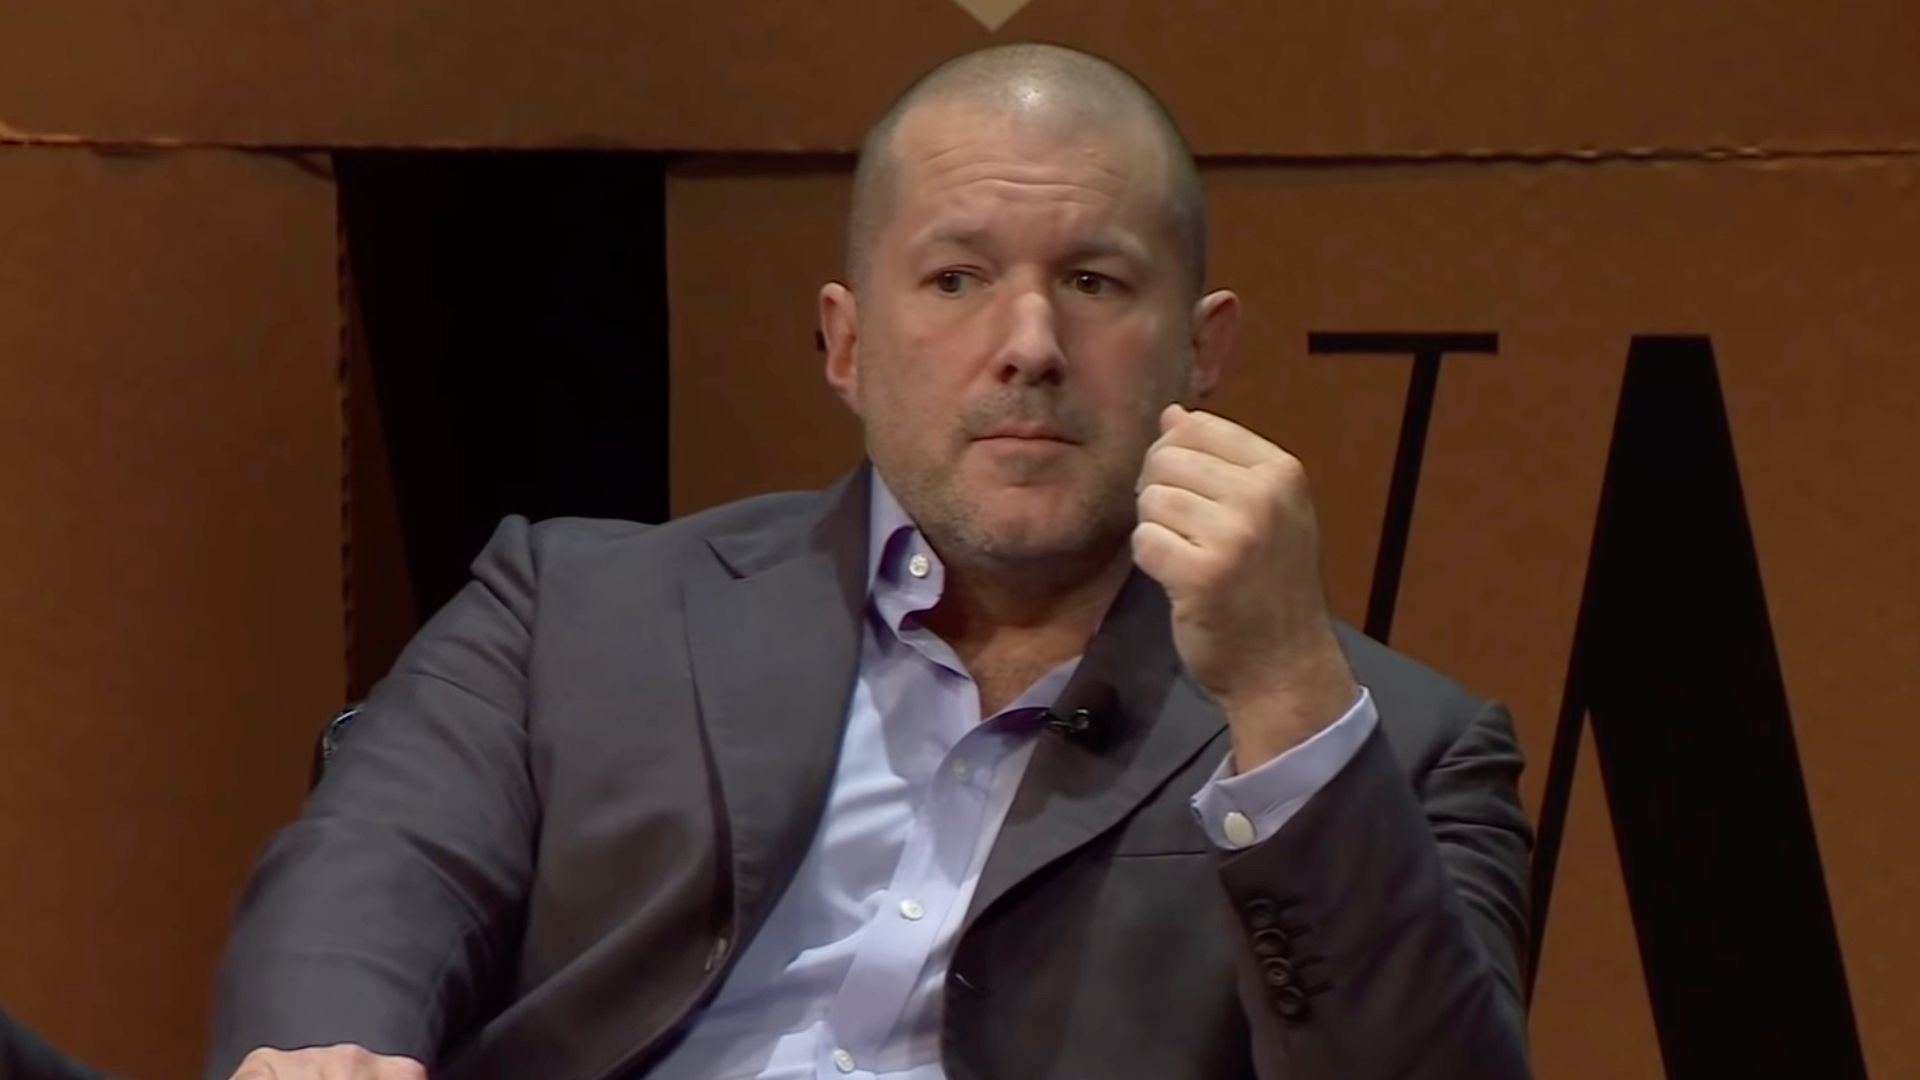 Jony Ive and OpenAI in Talks to Build 'the iPhone of Artificial Intelligence'